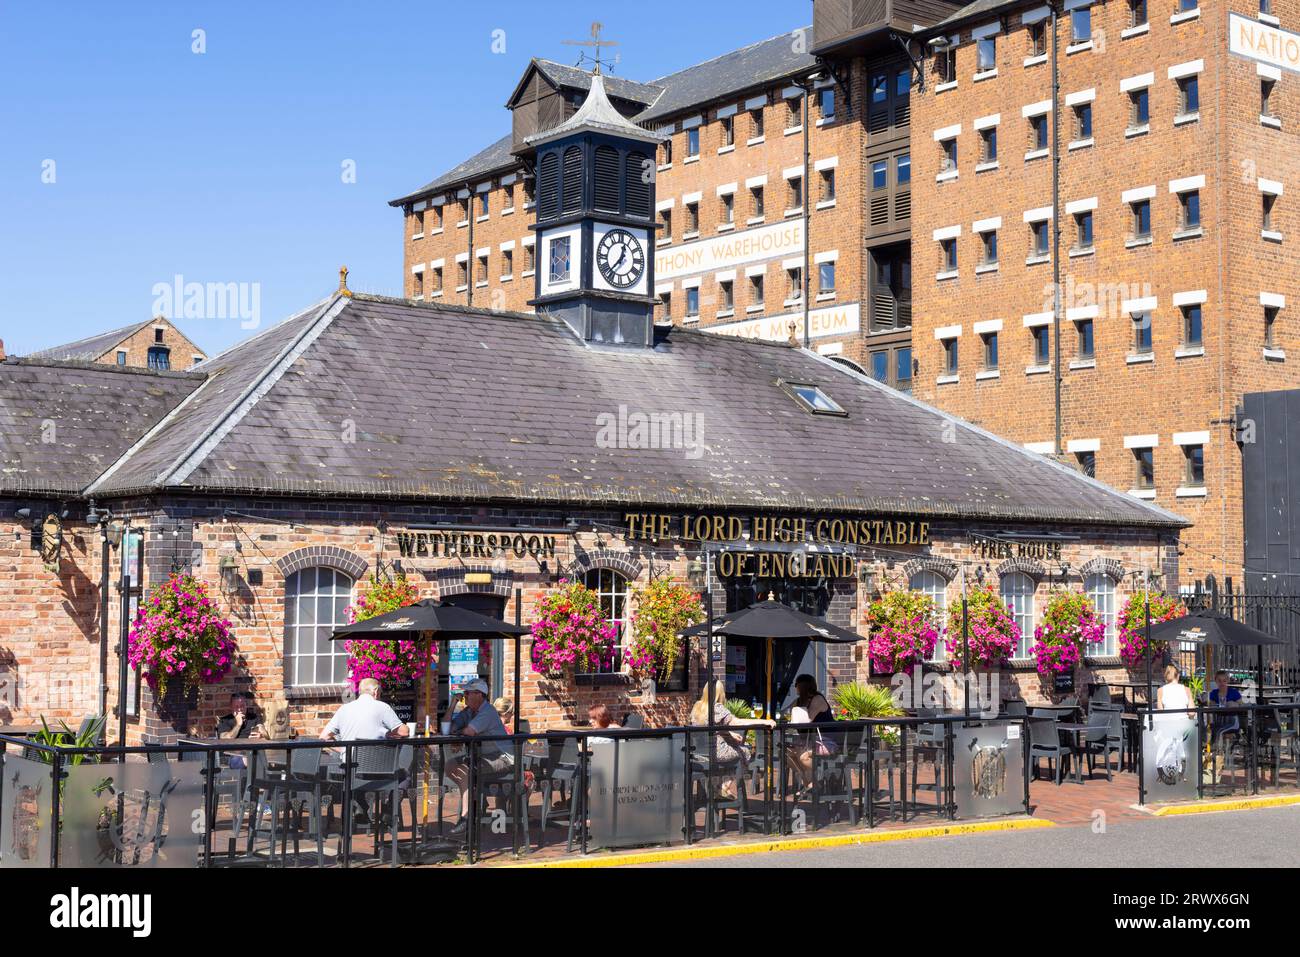 Gloucester docks pub The Lord High Constable of England a JD Wetherspoon pub Llanthony Warehouse Gloucester Gloucestershire England UK GB Europe Stock Photo